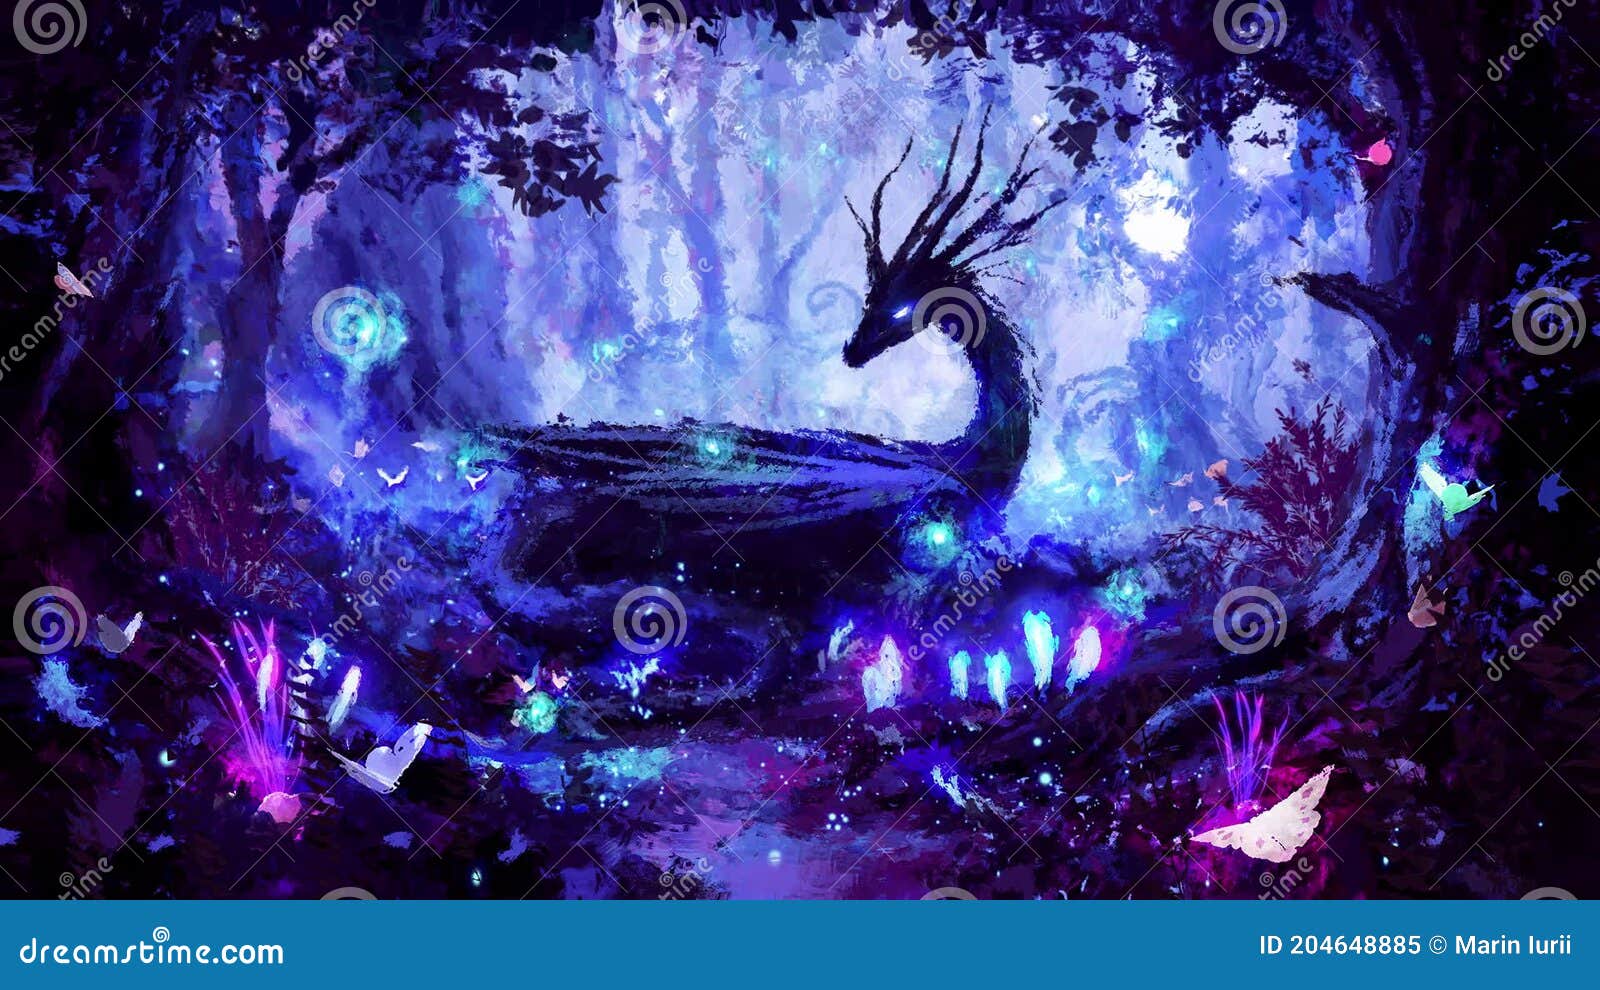 Large Winged Black Dragon With Glowing Eyes And Breathing Smoke And Ember  In A Wooded Clearing With A Beam Of Light Stock Photo - Download Image Now  - iStock